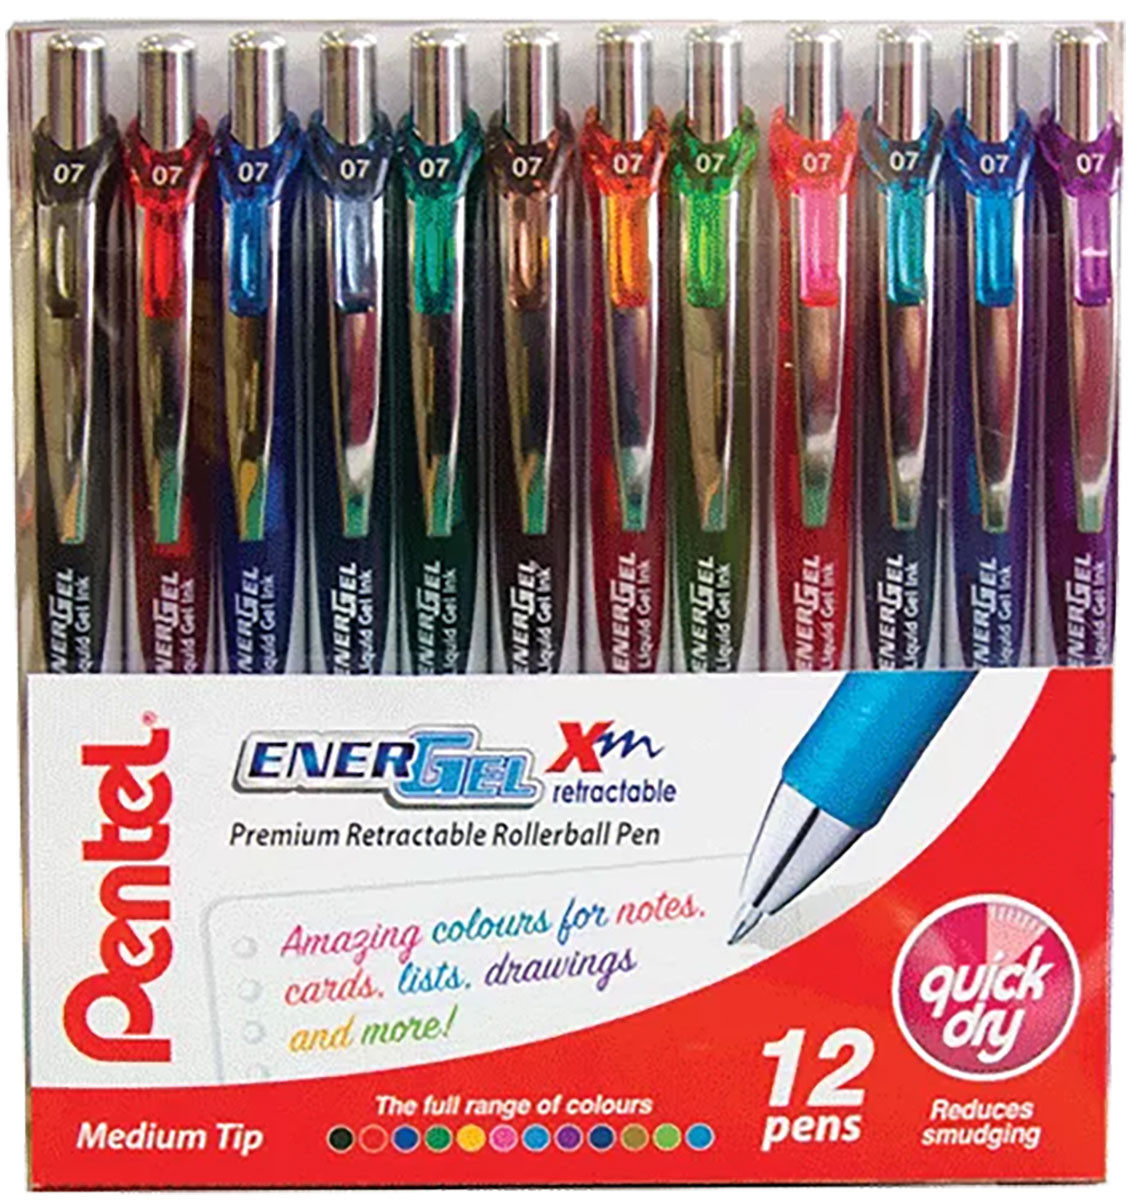 Pentel EnerGel XM Retractable Rollerball Pen - 0.7mm - Assorted Colours (Pack of 12)